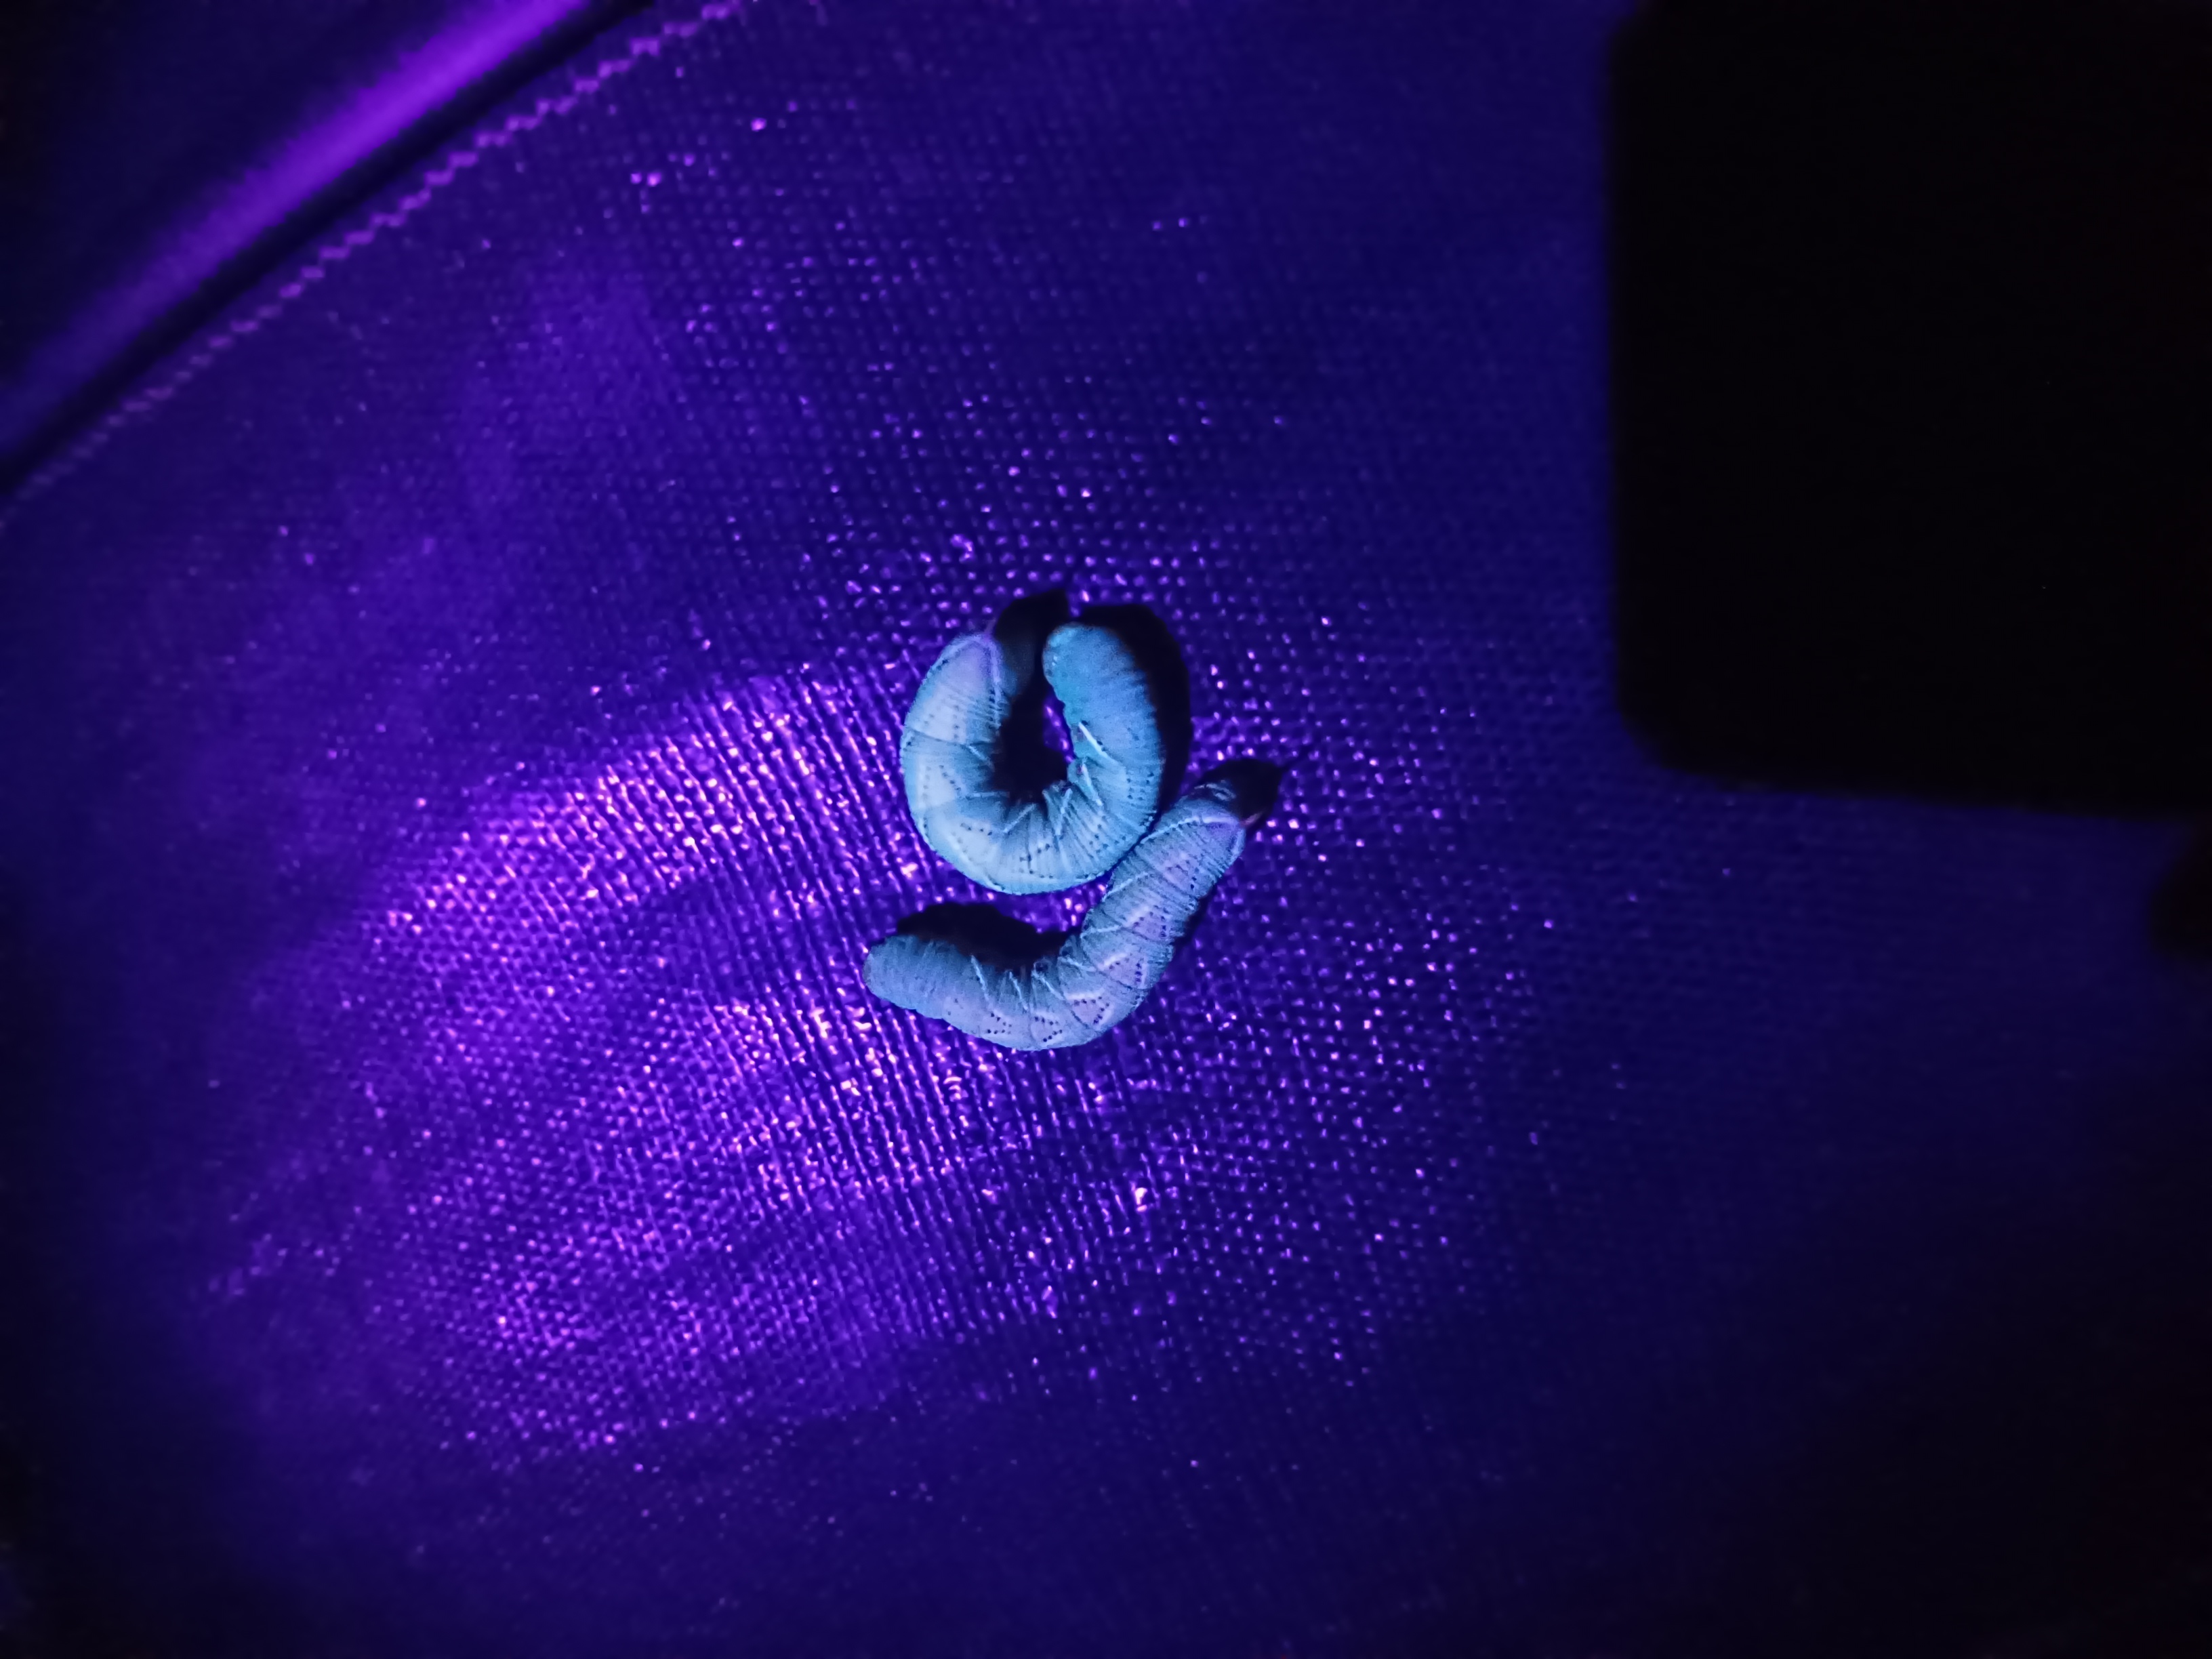 First a look at the worms under black light on weed barrier